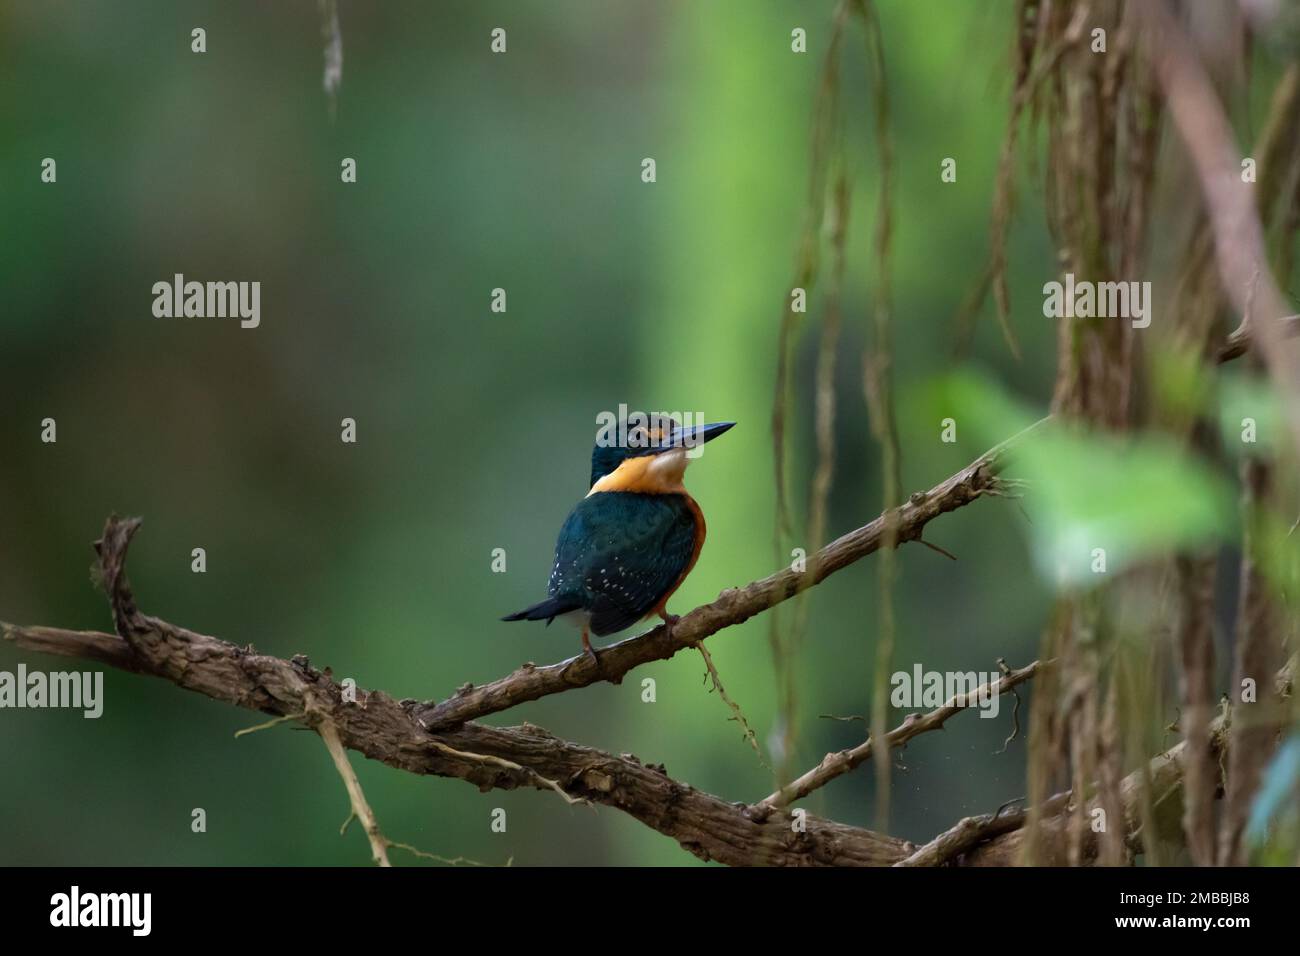 Small American Pygmy Kingfisher bird perched on a branch near some vines in the dense jungle. Stock Photo